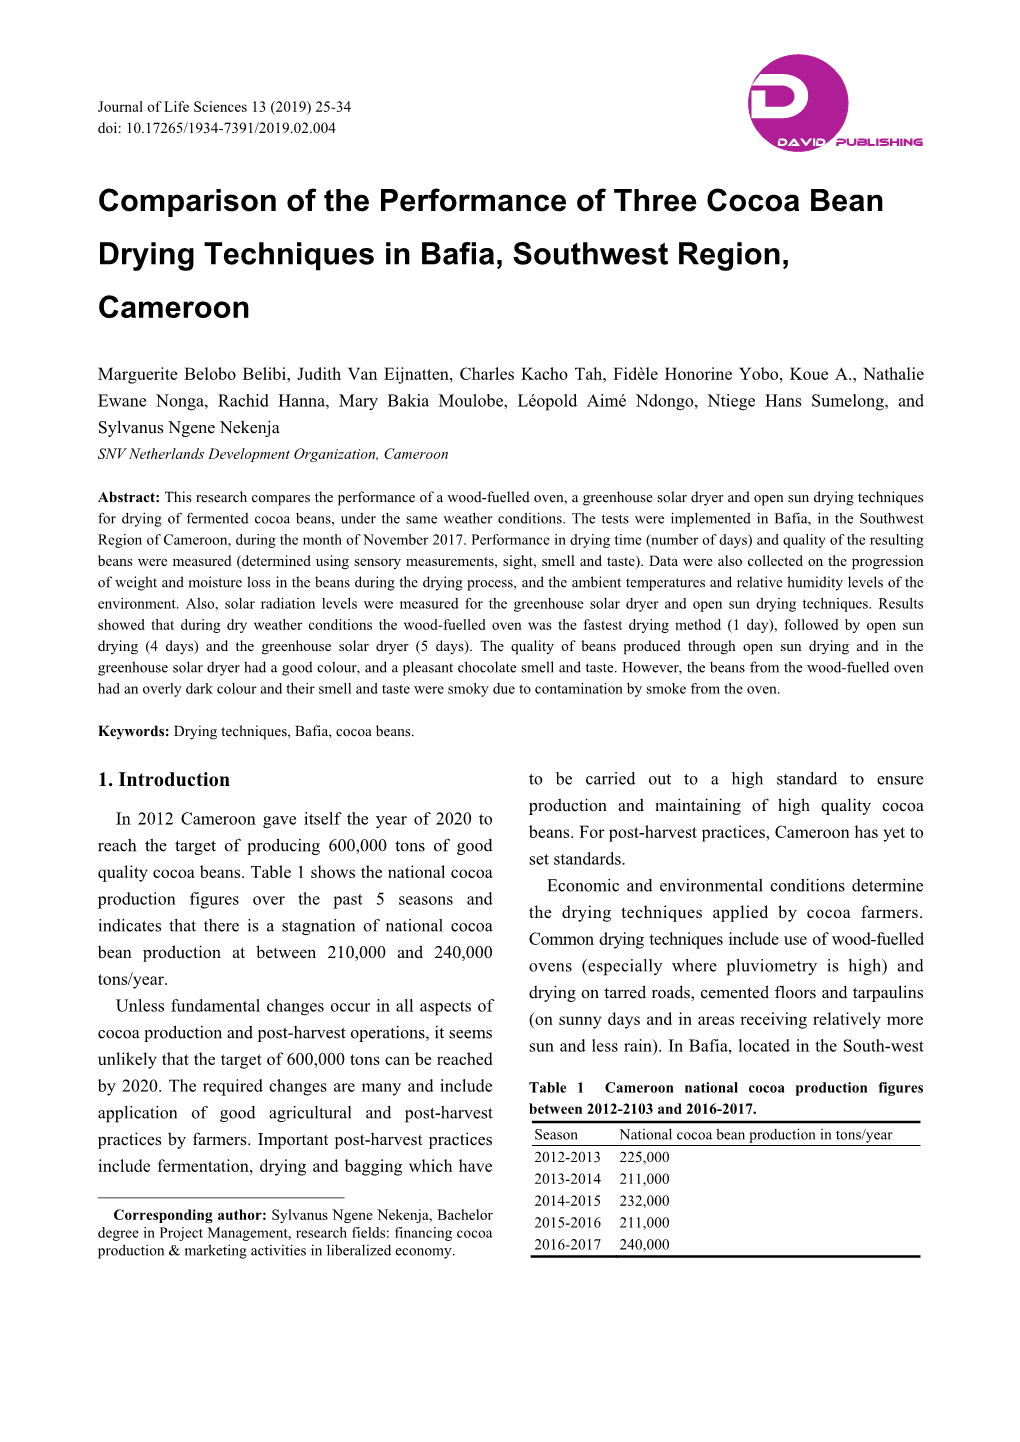 Comparison of the Performance of Three Cocoa Bean Drying Techniques in Bafia, Southwest Region, Cameroon